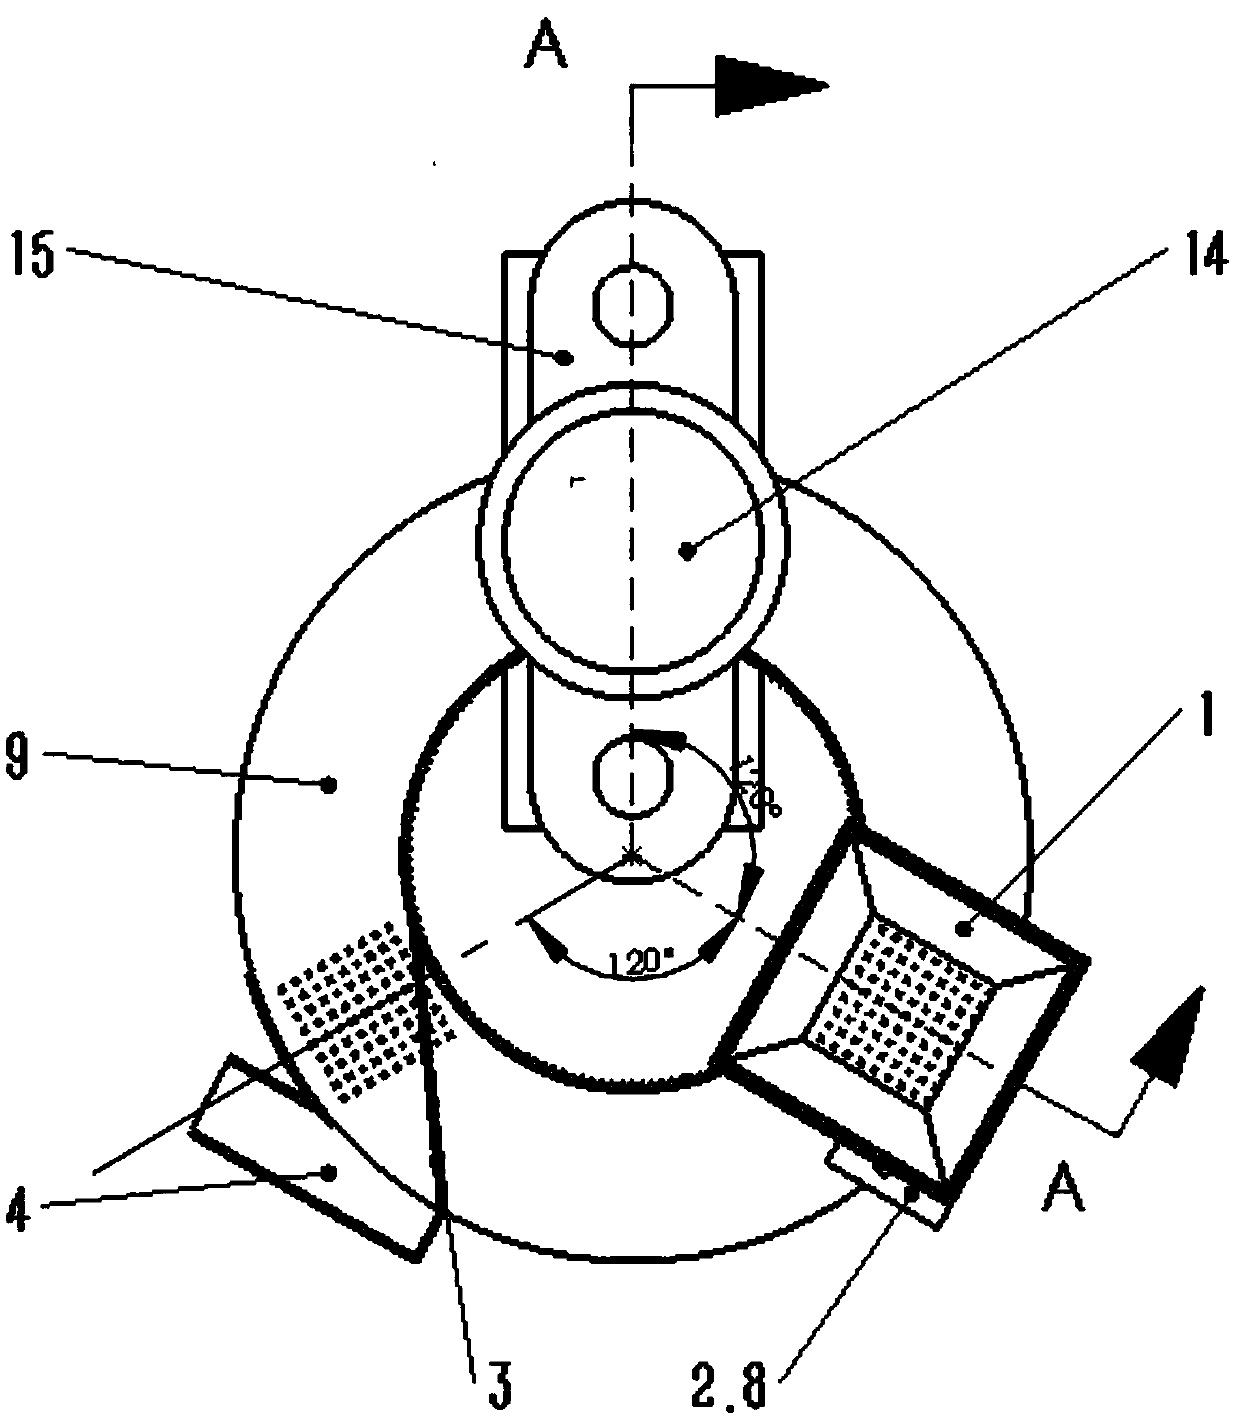 A powder compacting device